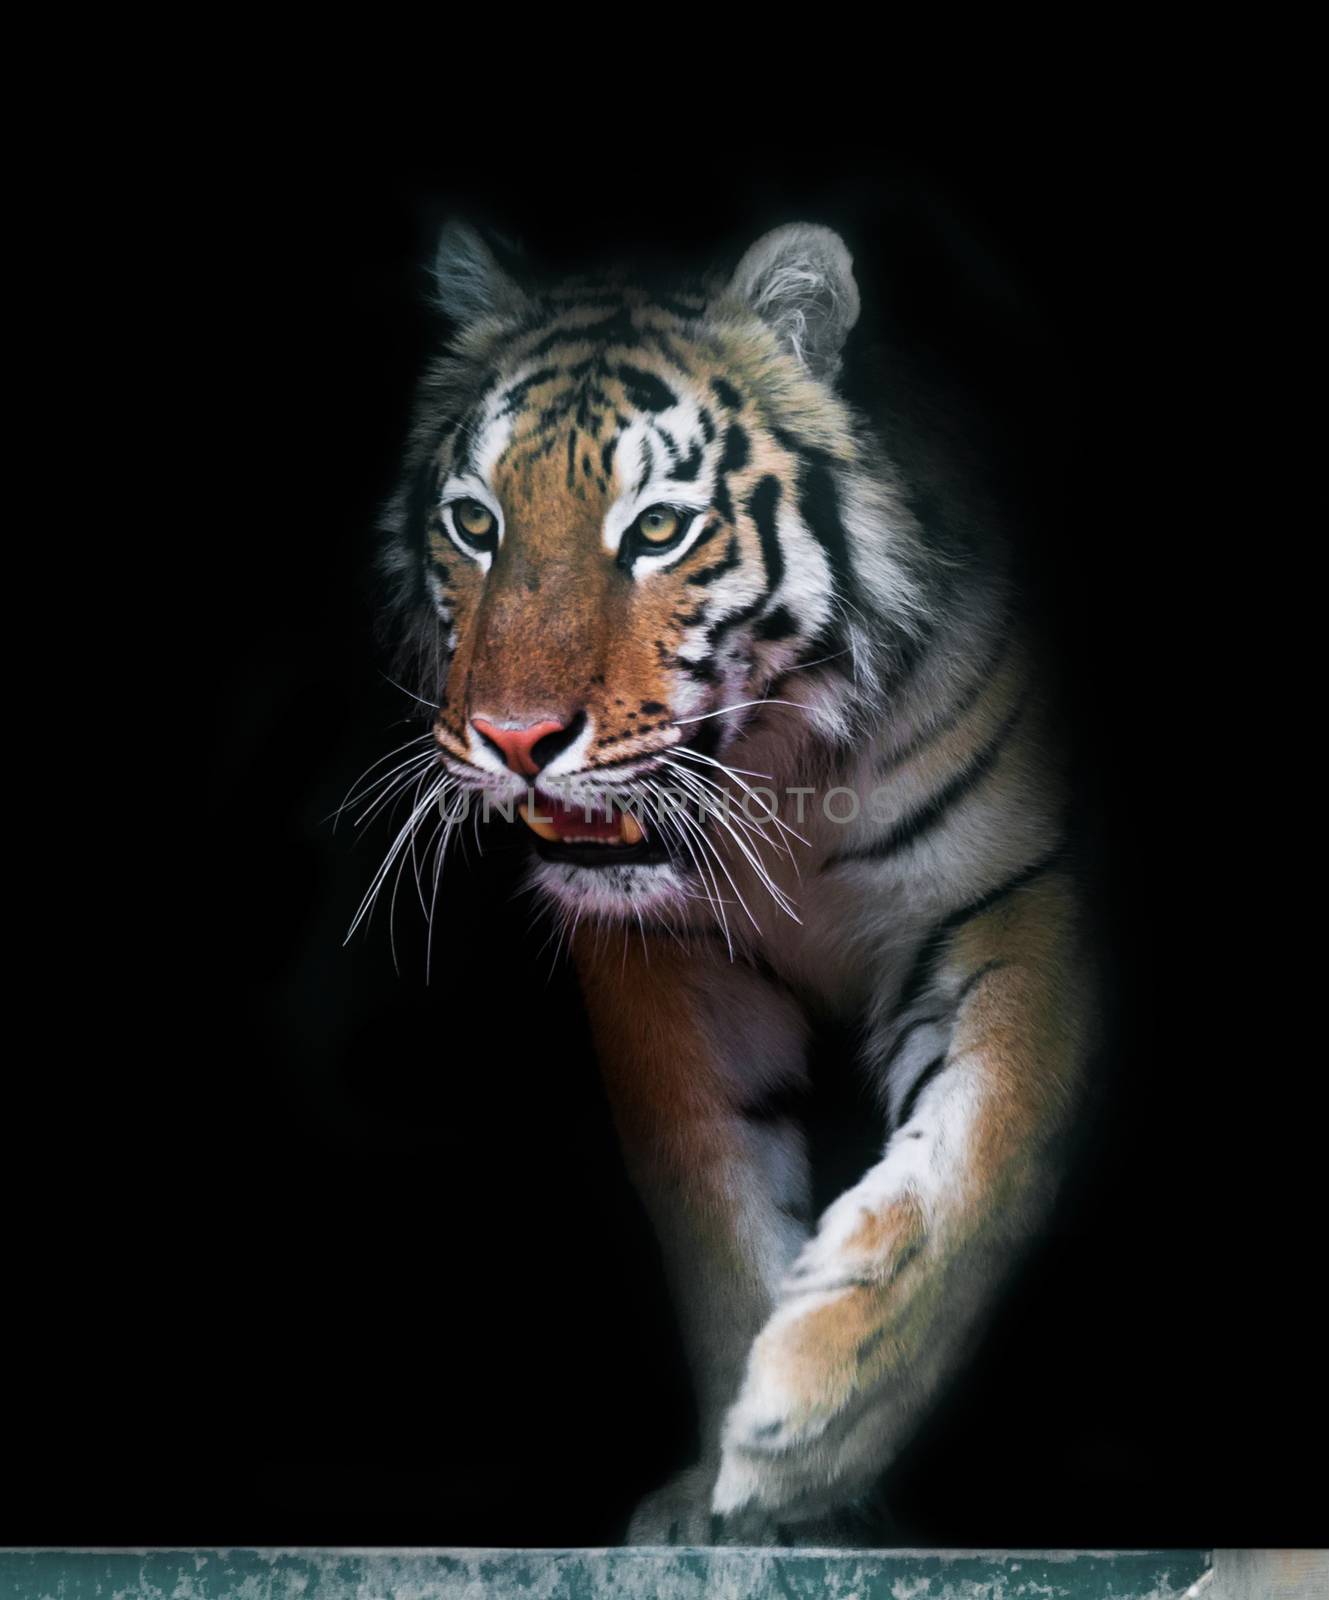 Tiger coming out by MegaArt